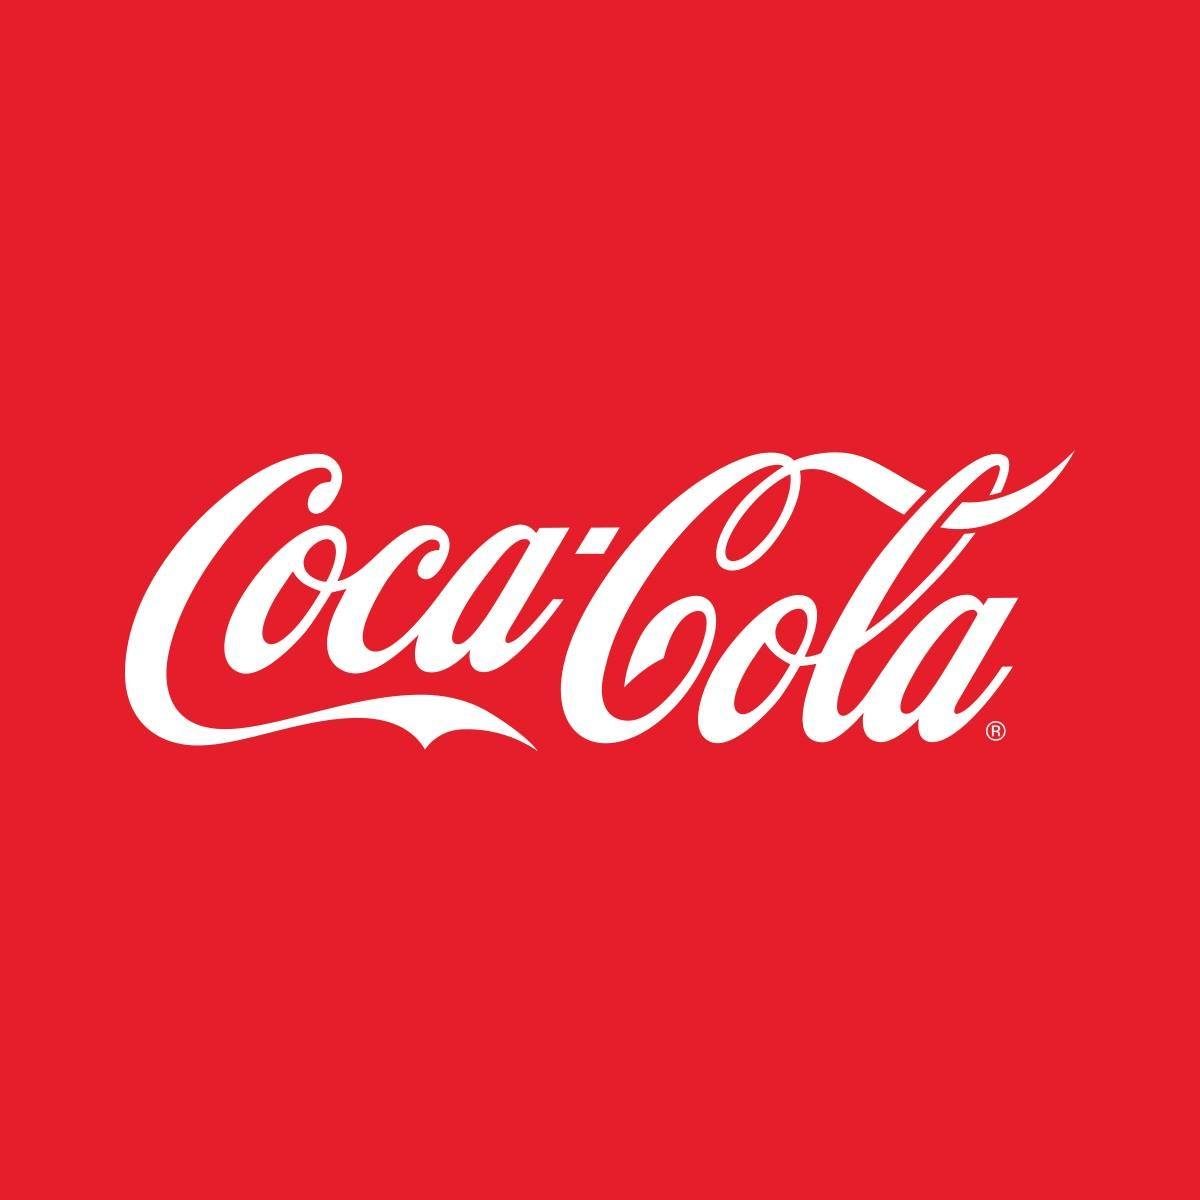 <p><strong><a class="SWhtmlLink" href="https://us.coca-cola.com" rel="noopener">Coca-Cola</a>, Atlanta</strong></p> <p>Did you know that the original recipe of Coca-Cola actually contained extracts of cocaine and kola nut? The recipe is still a secret today, but it certainly doesn't contain anything illegal anymore.</p>